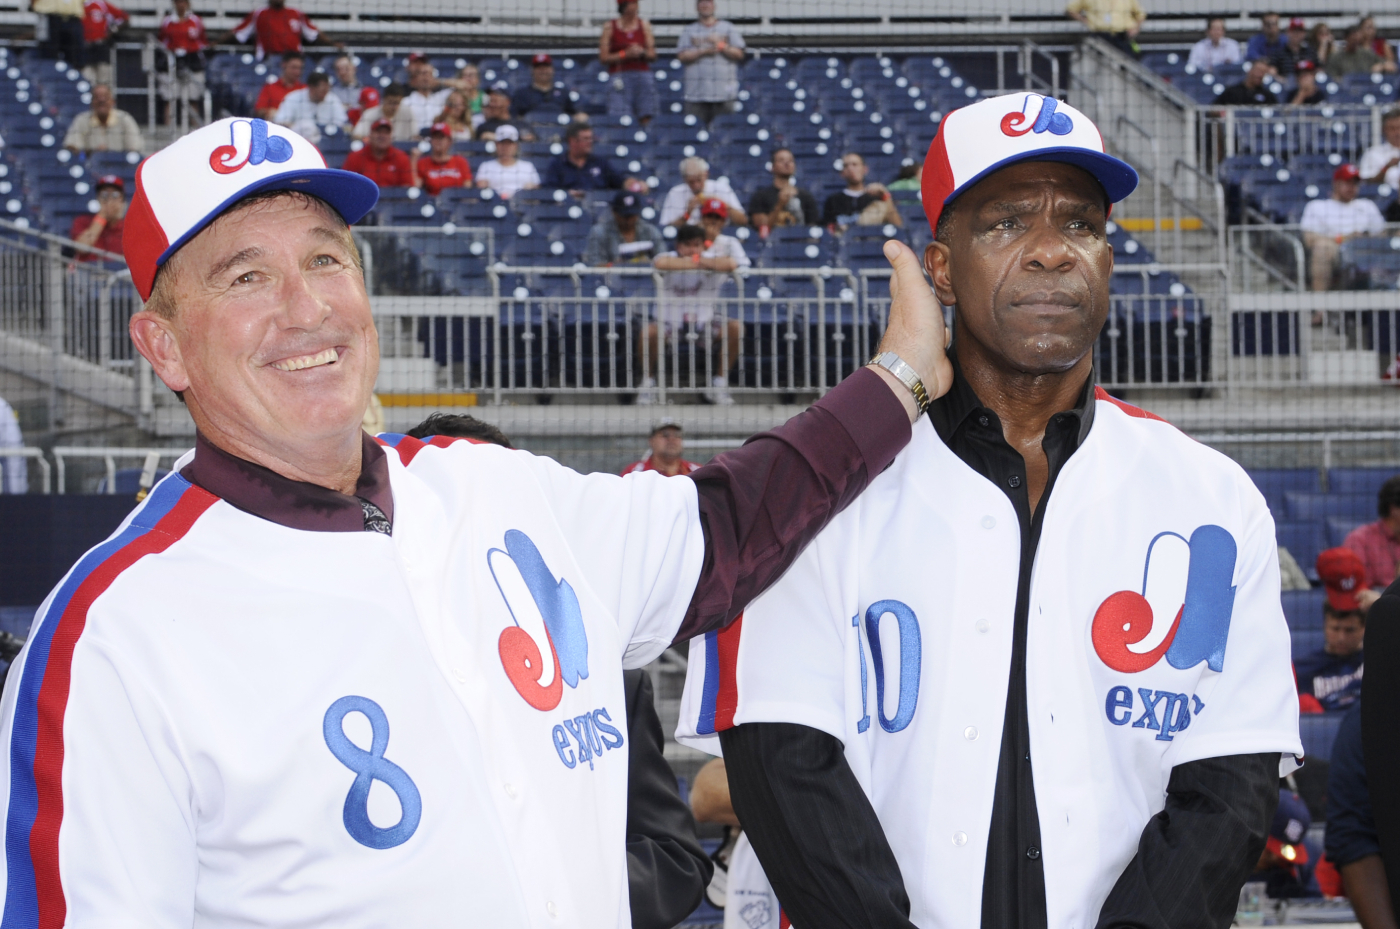 Gary Carter, Hall of Fame catcher, dies from a brain tumor at age 57 